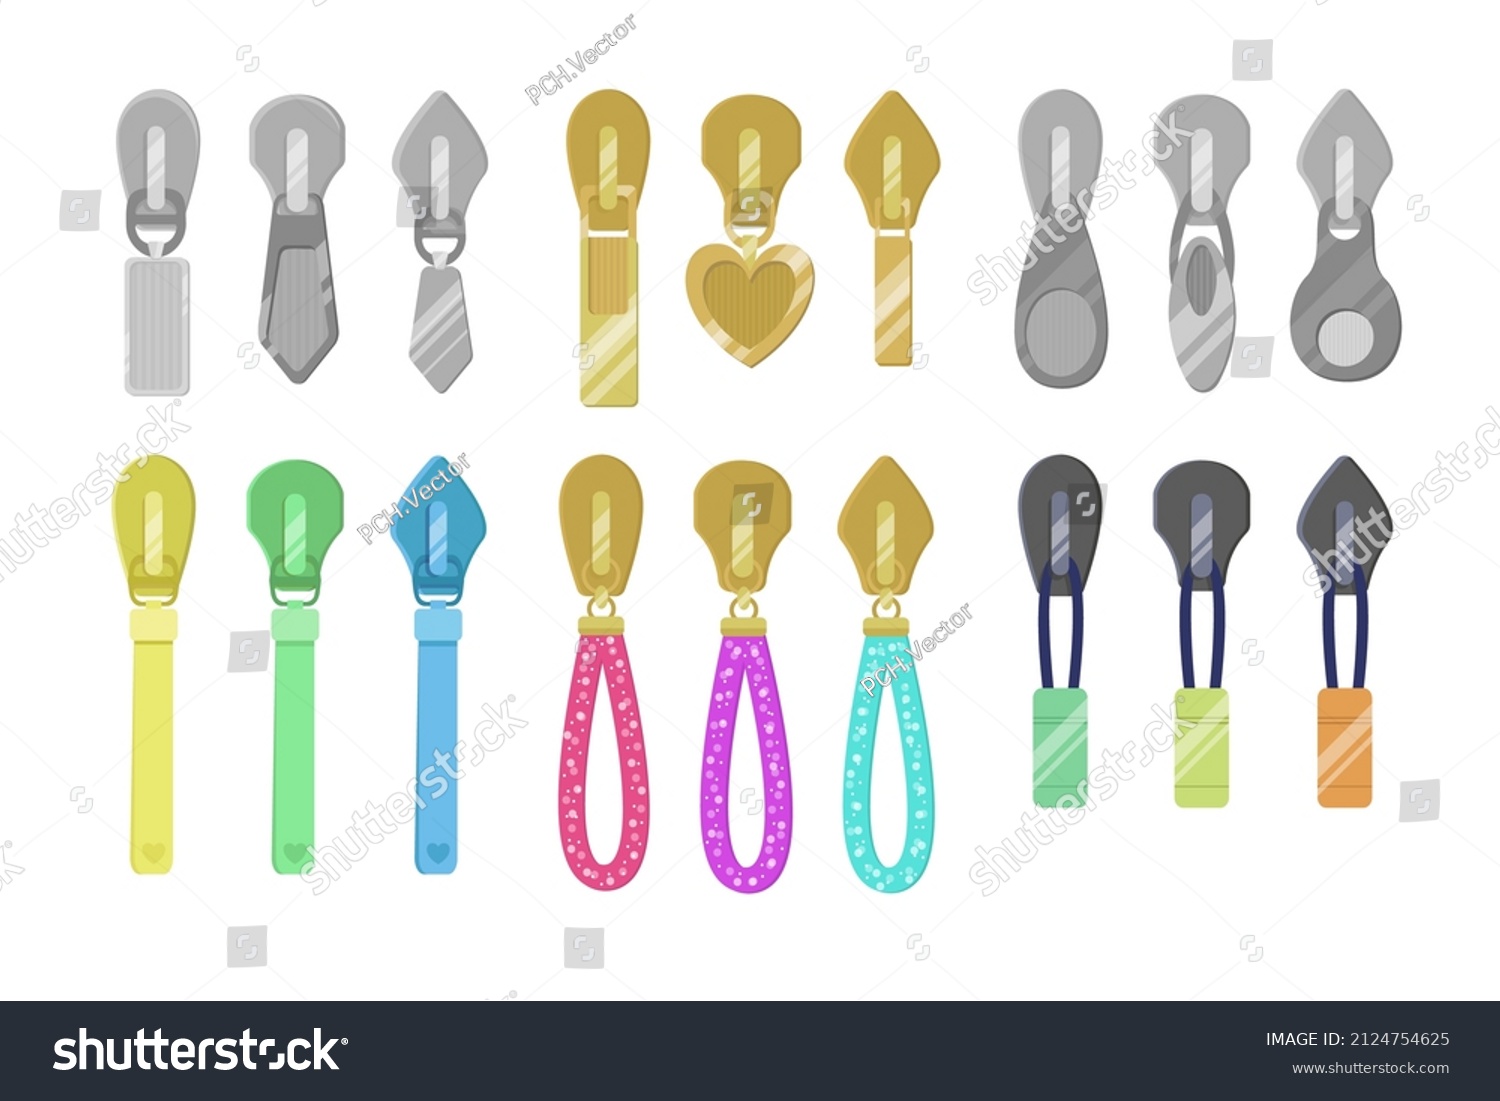 SVG of Modern zip sliders for clothes cartoon illustration set. Gold and silver zipper pullers with tassels for sportswear or leather backpacks. Fashion, metal accessories concept svg